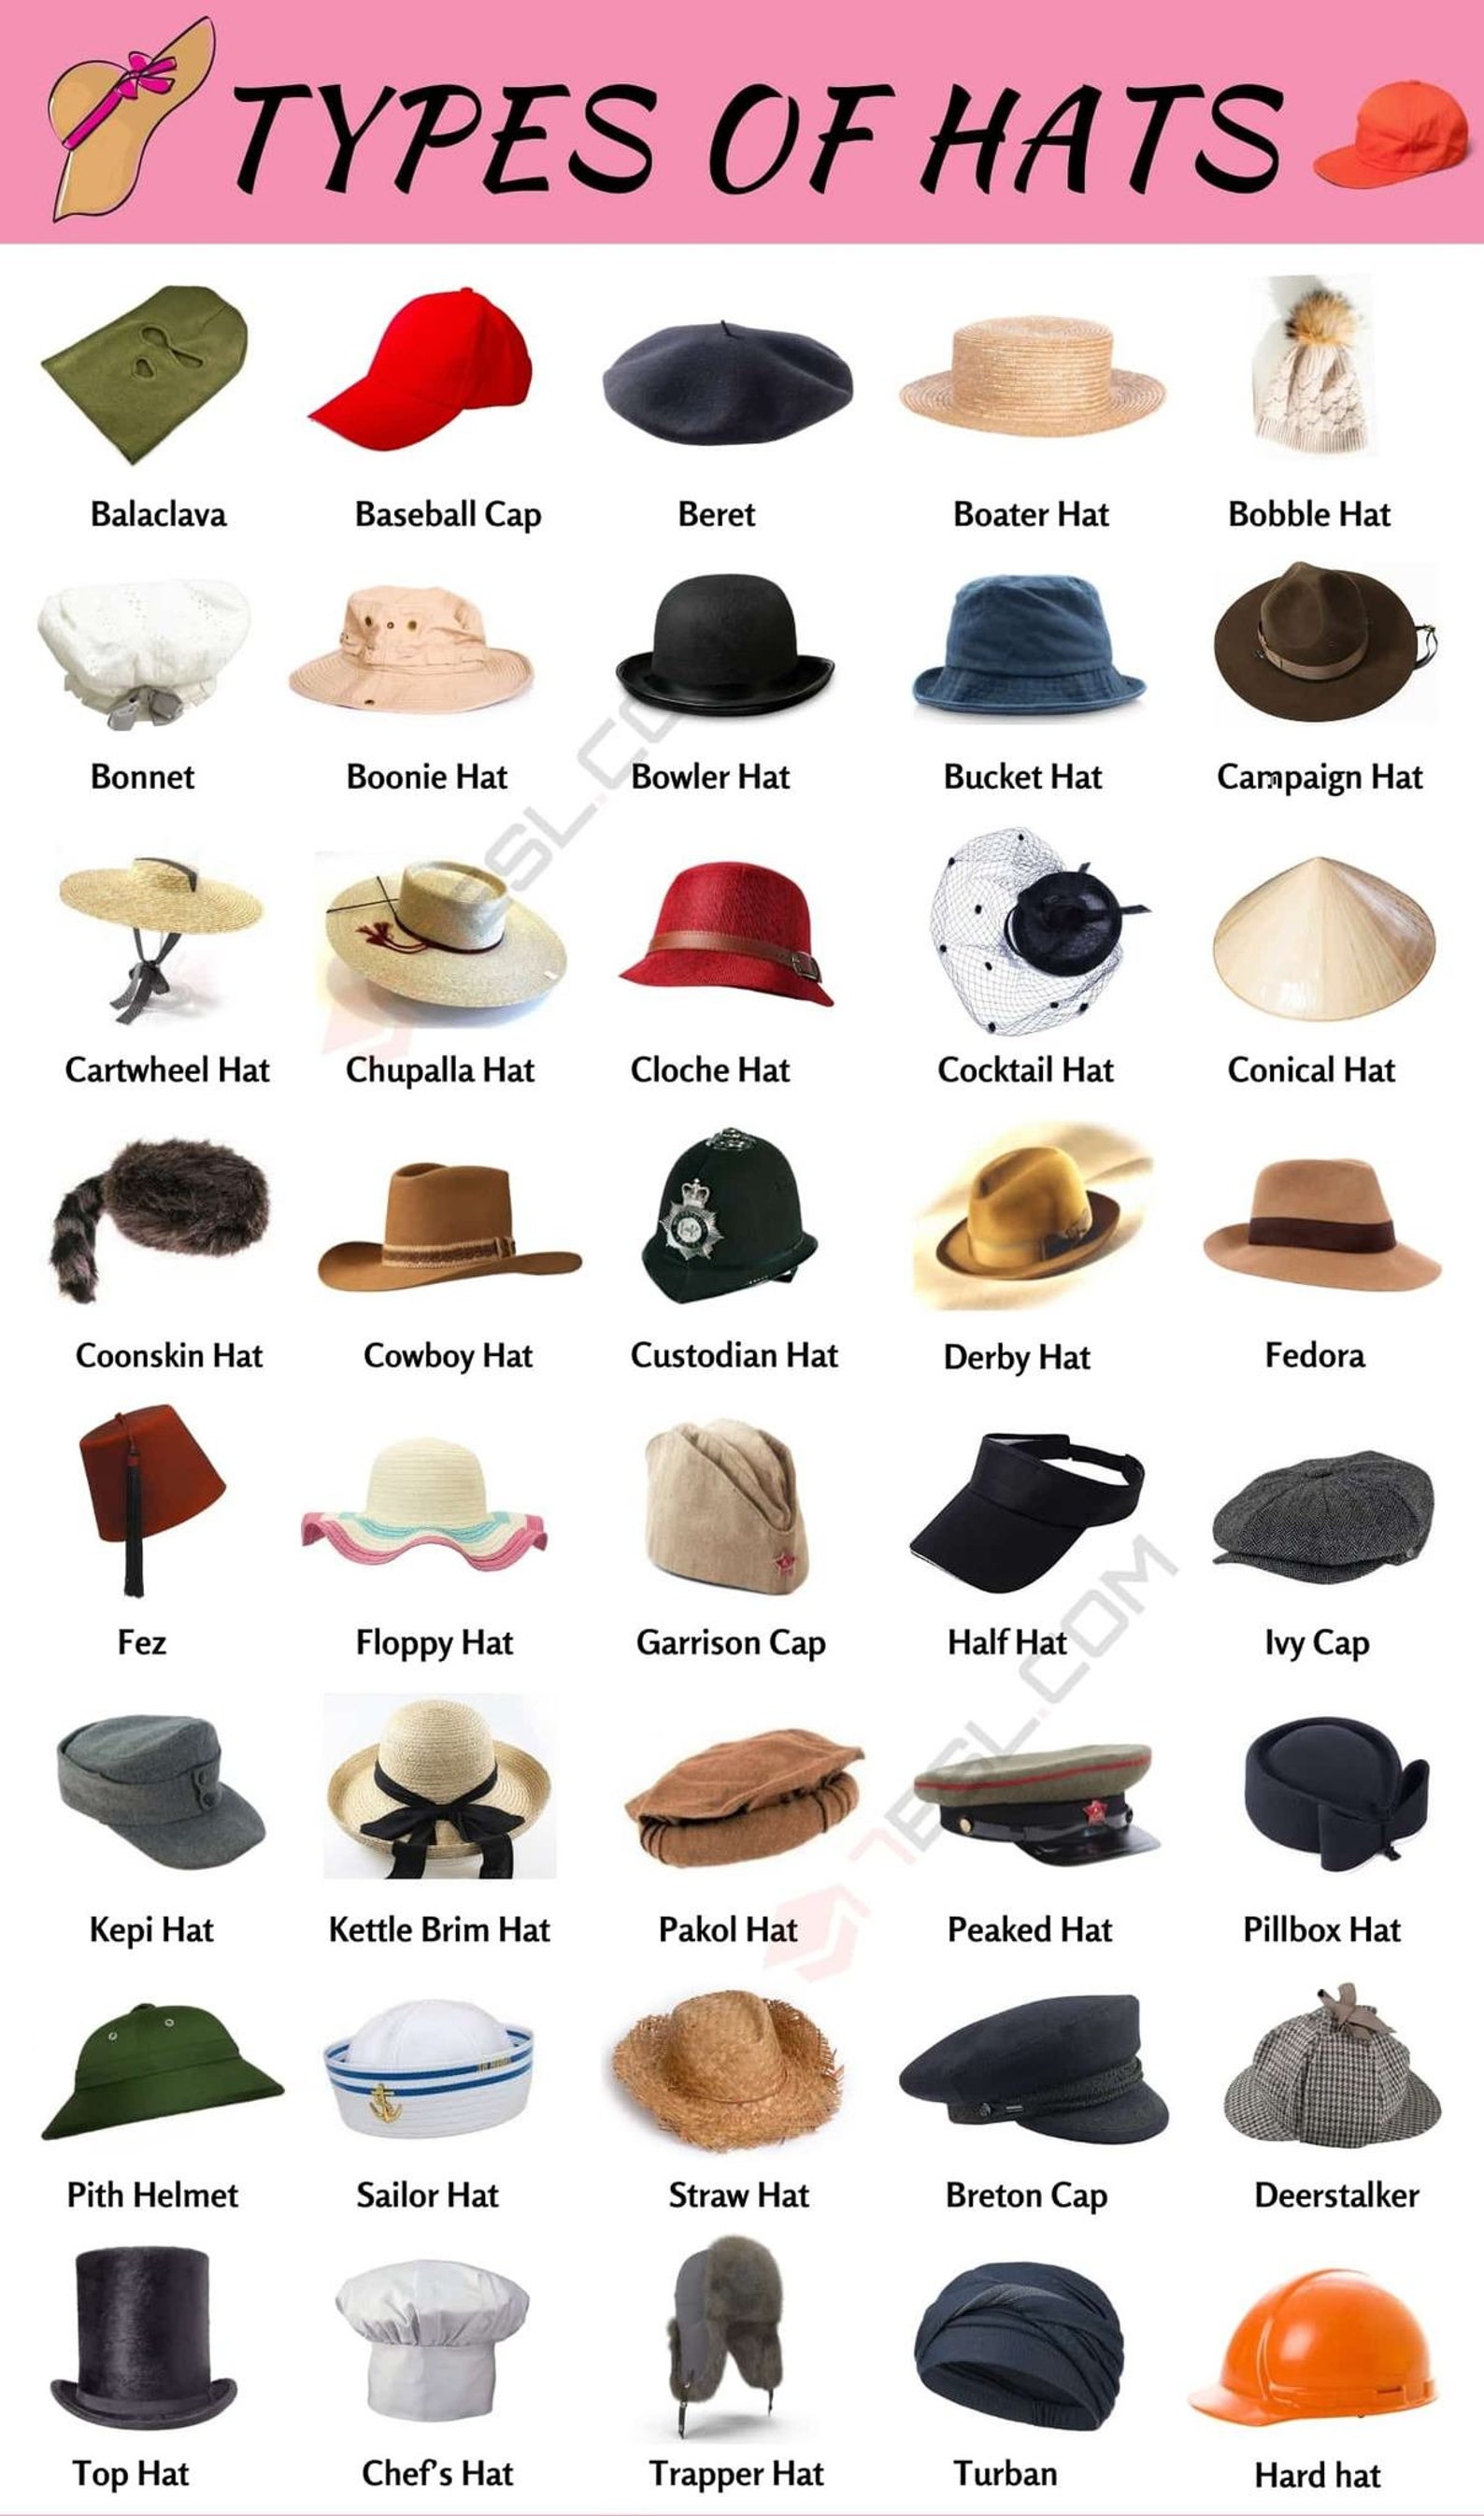 Guide to Hat Types Digital Download Reference Educational Print JPEG - Etsy